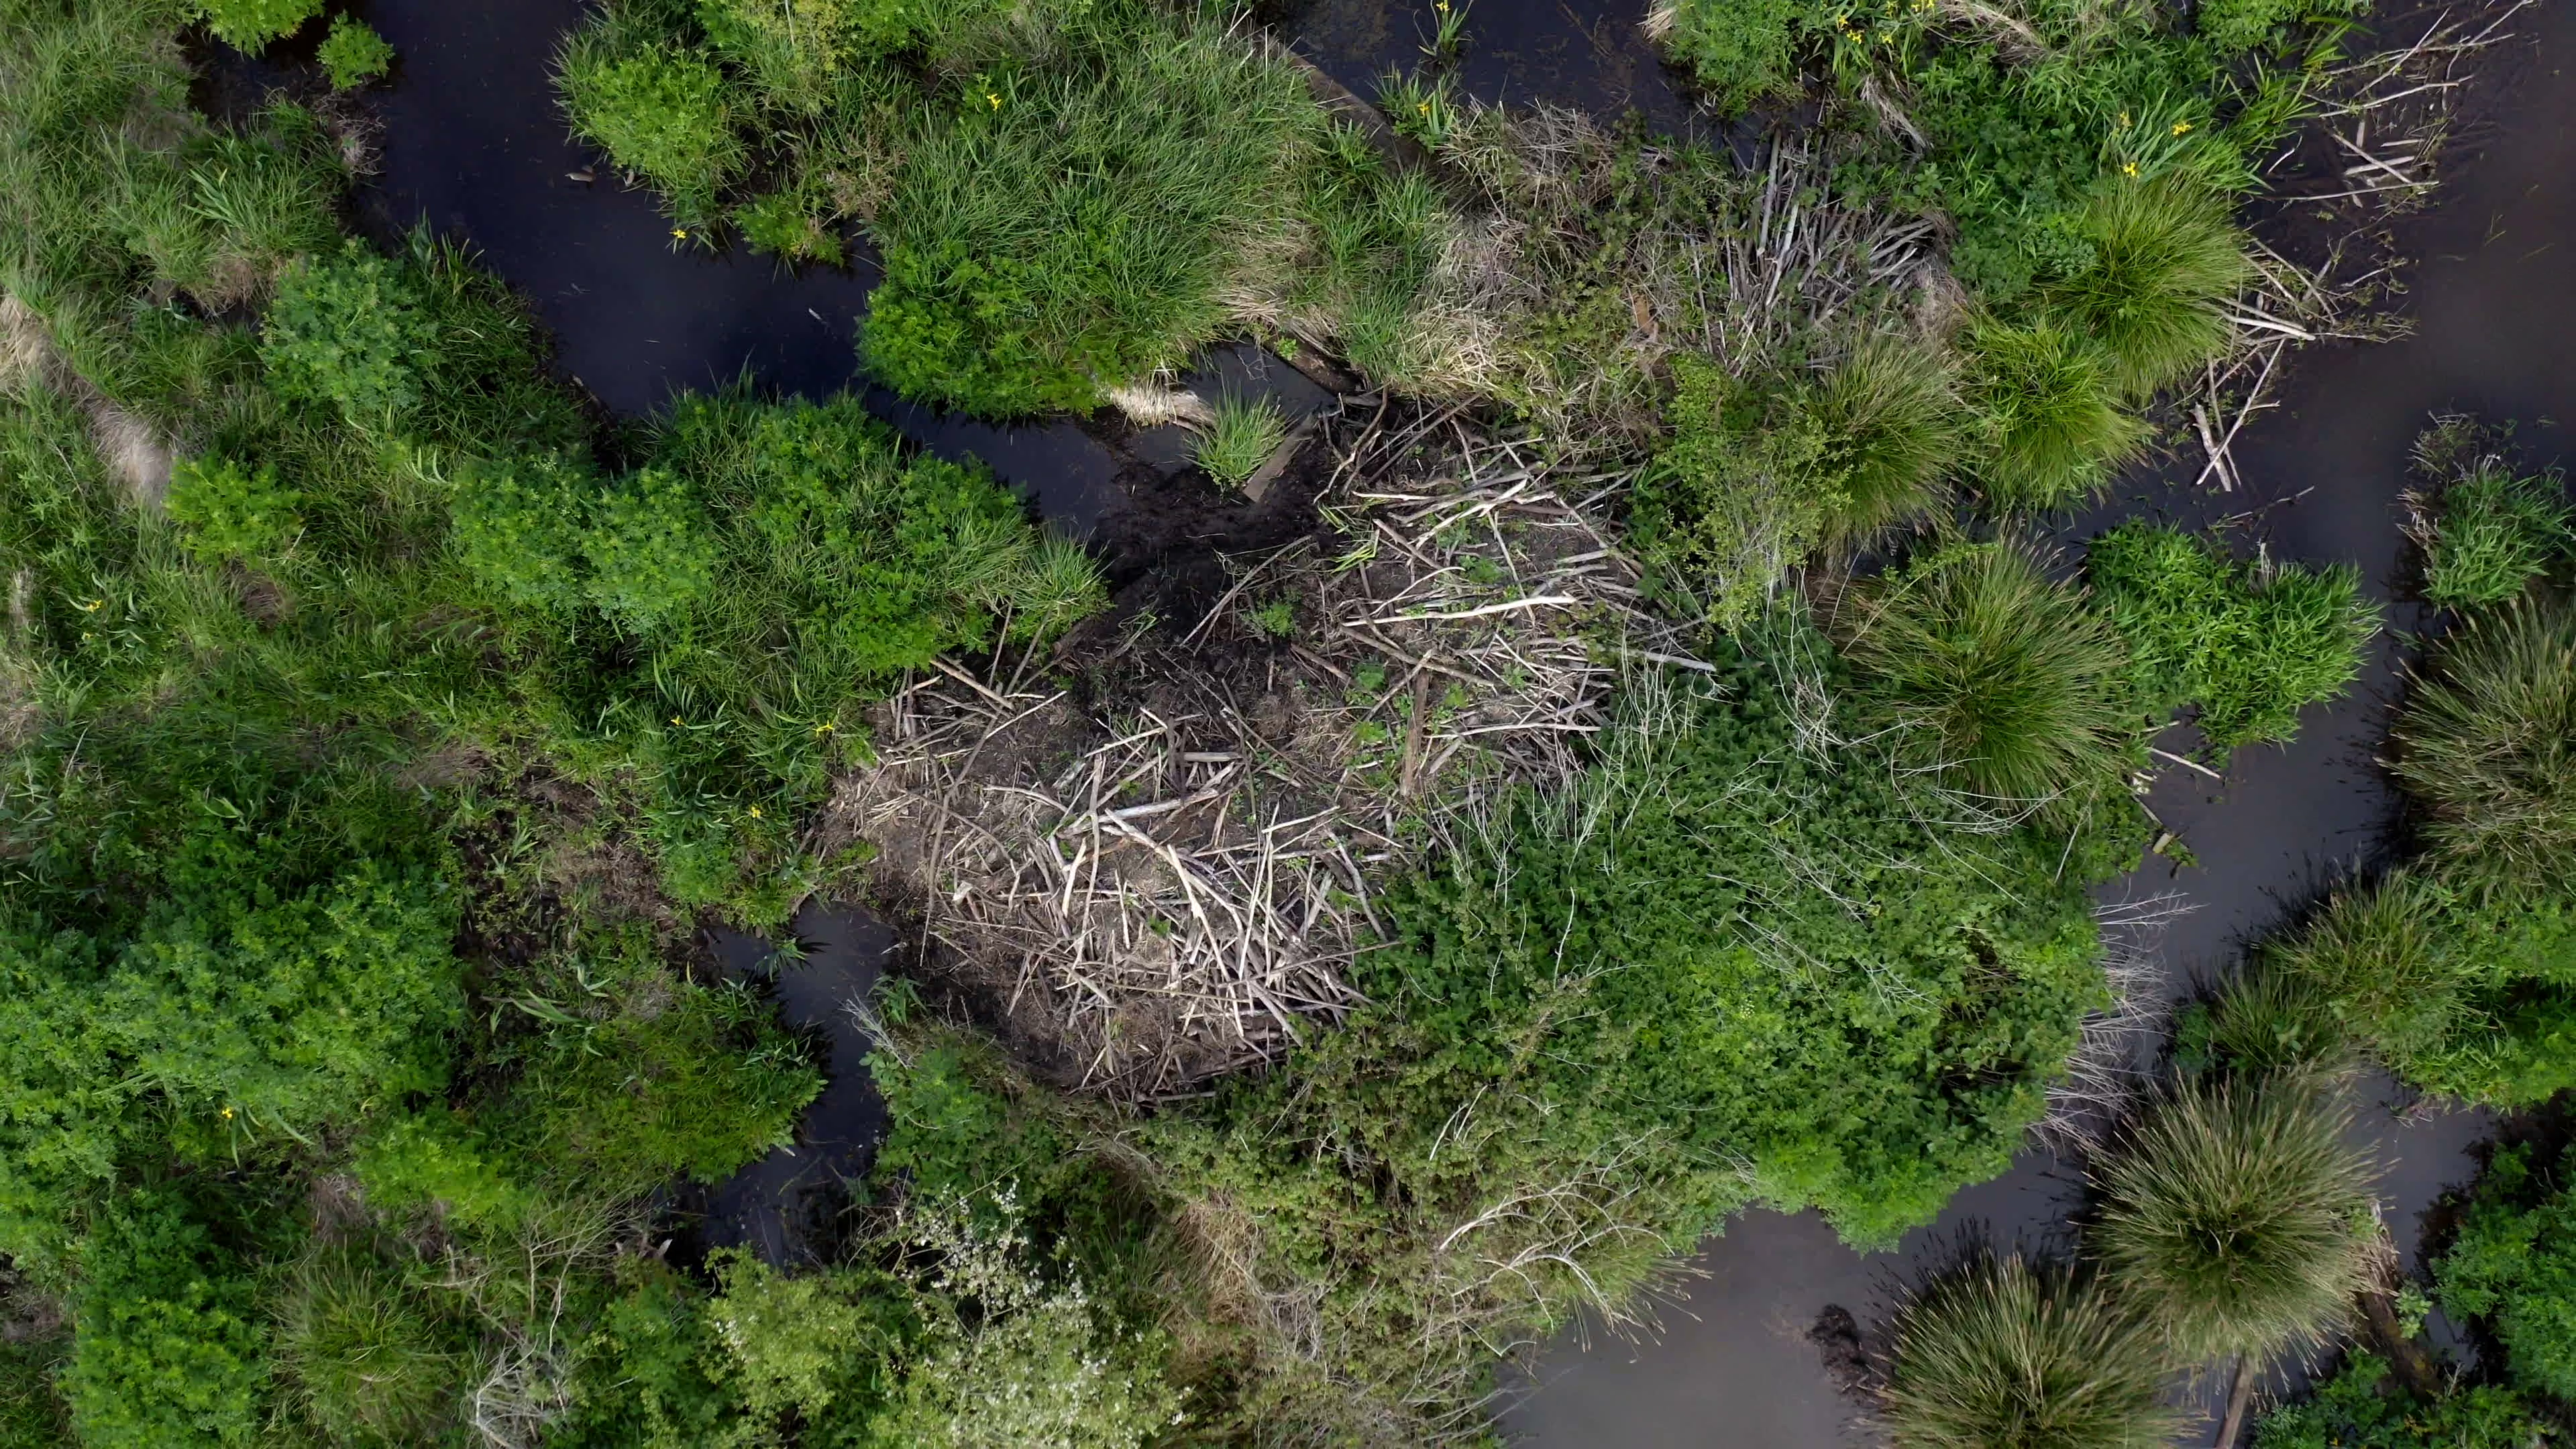 New NASA imagery reveals startling behavior among group of ‘banished’ beavers: ‘[They] were just about everywhere’